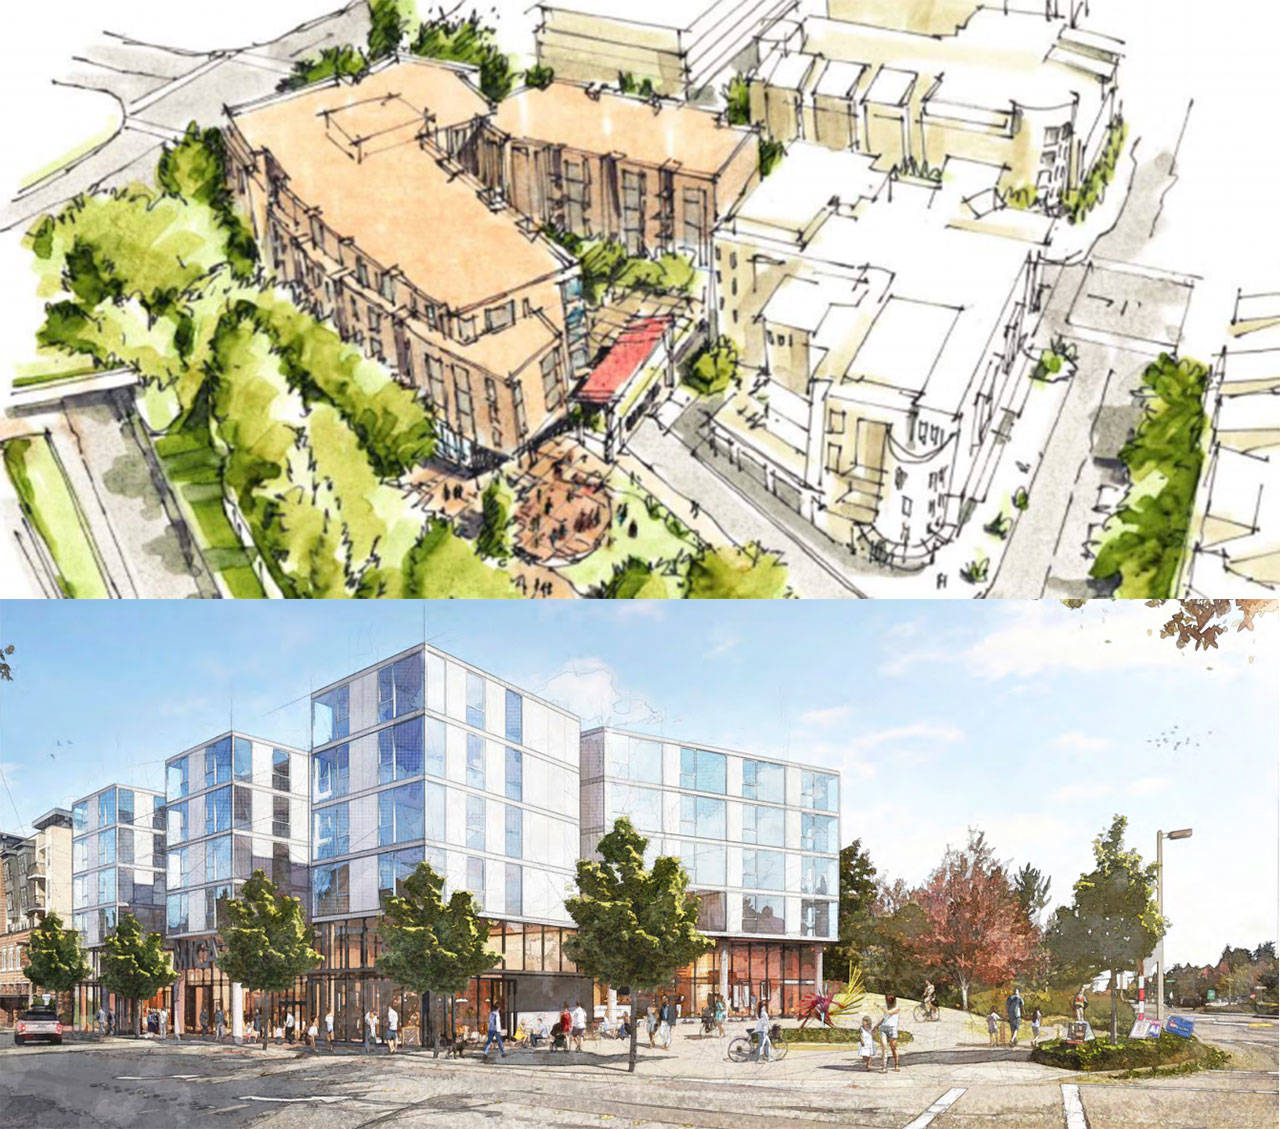 The concepts from Mainstreet Property Group LLC (top) and Shelter Holding/Weinstein A+U were selected as finalists in an RFQ process for a commuter parking and mixed-use project in Mercer Island’s Town Center. Courtesy photos